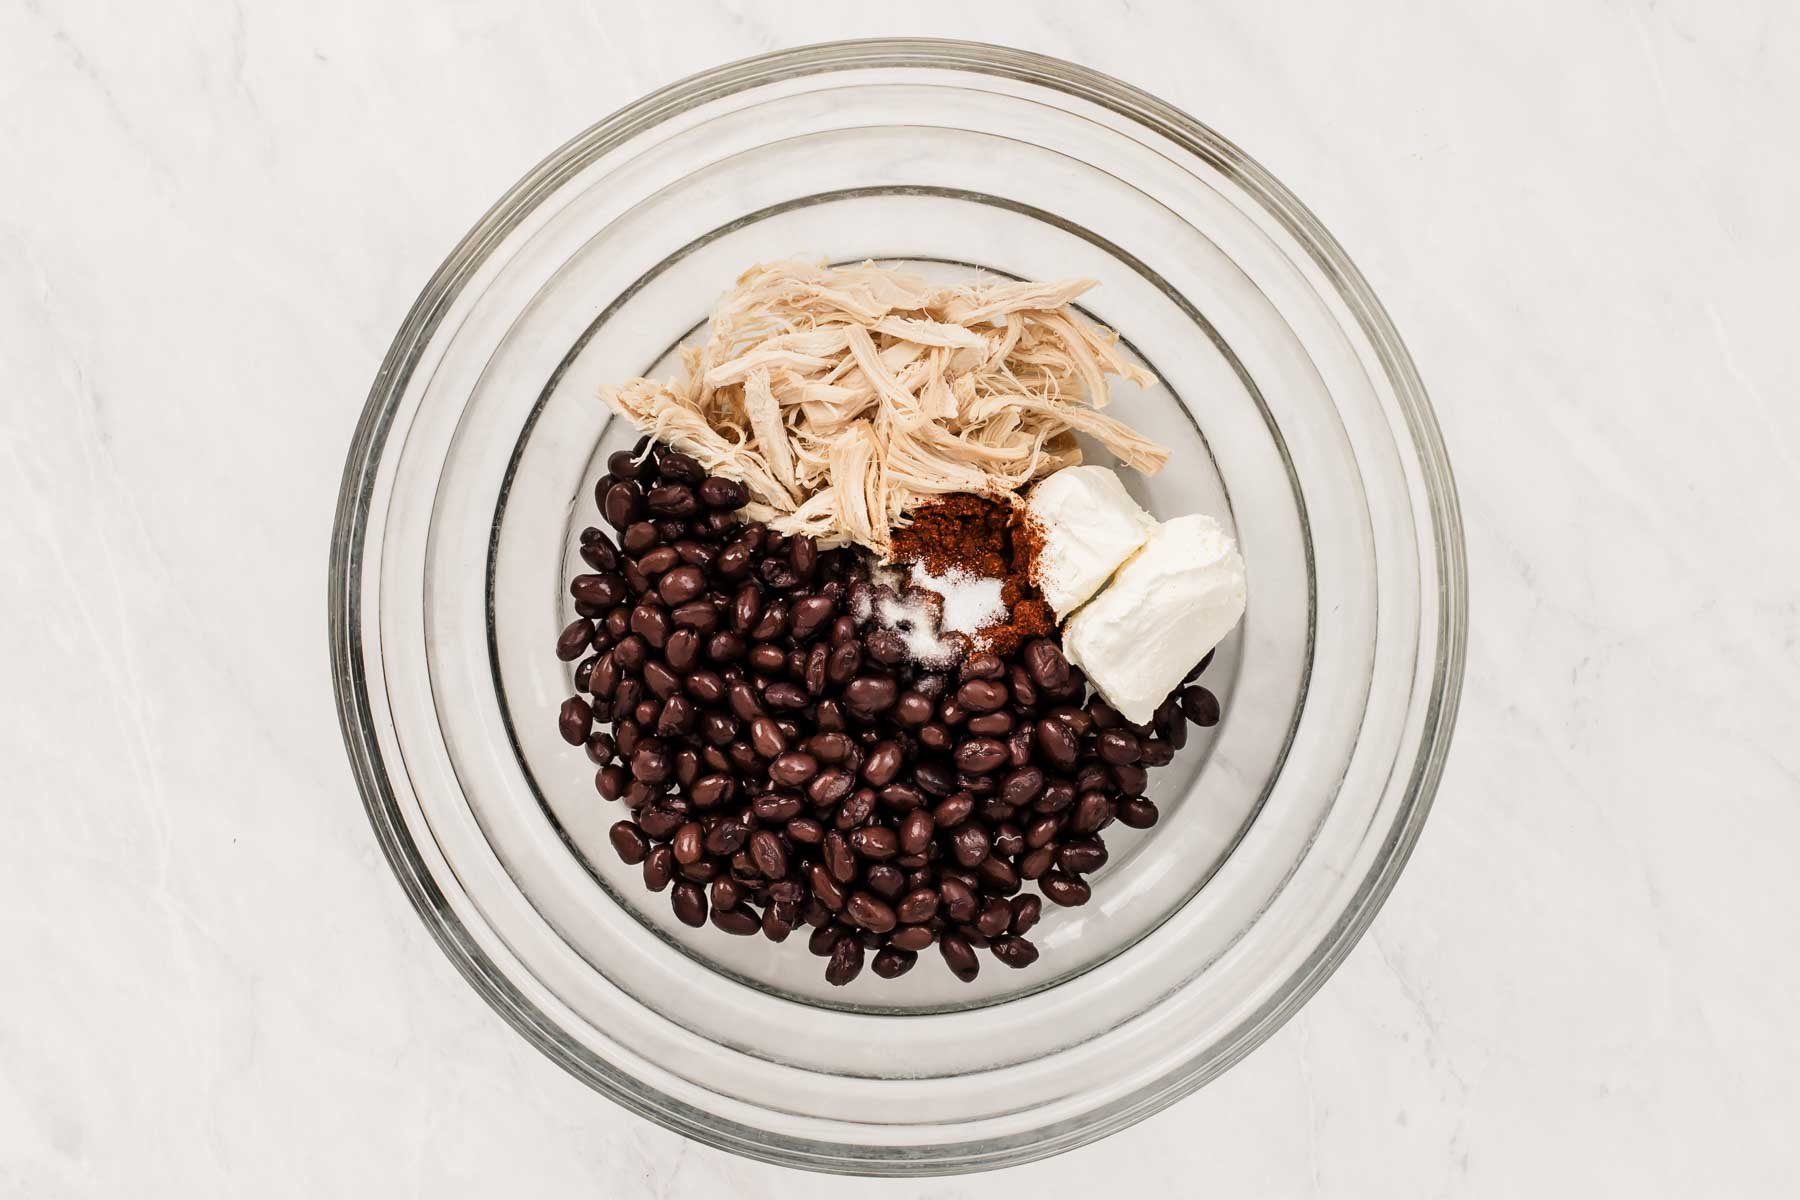 Bowl of black beans, shredded chicken, cream cheese and spices.